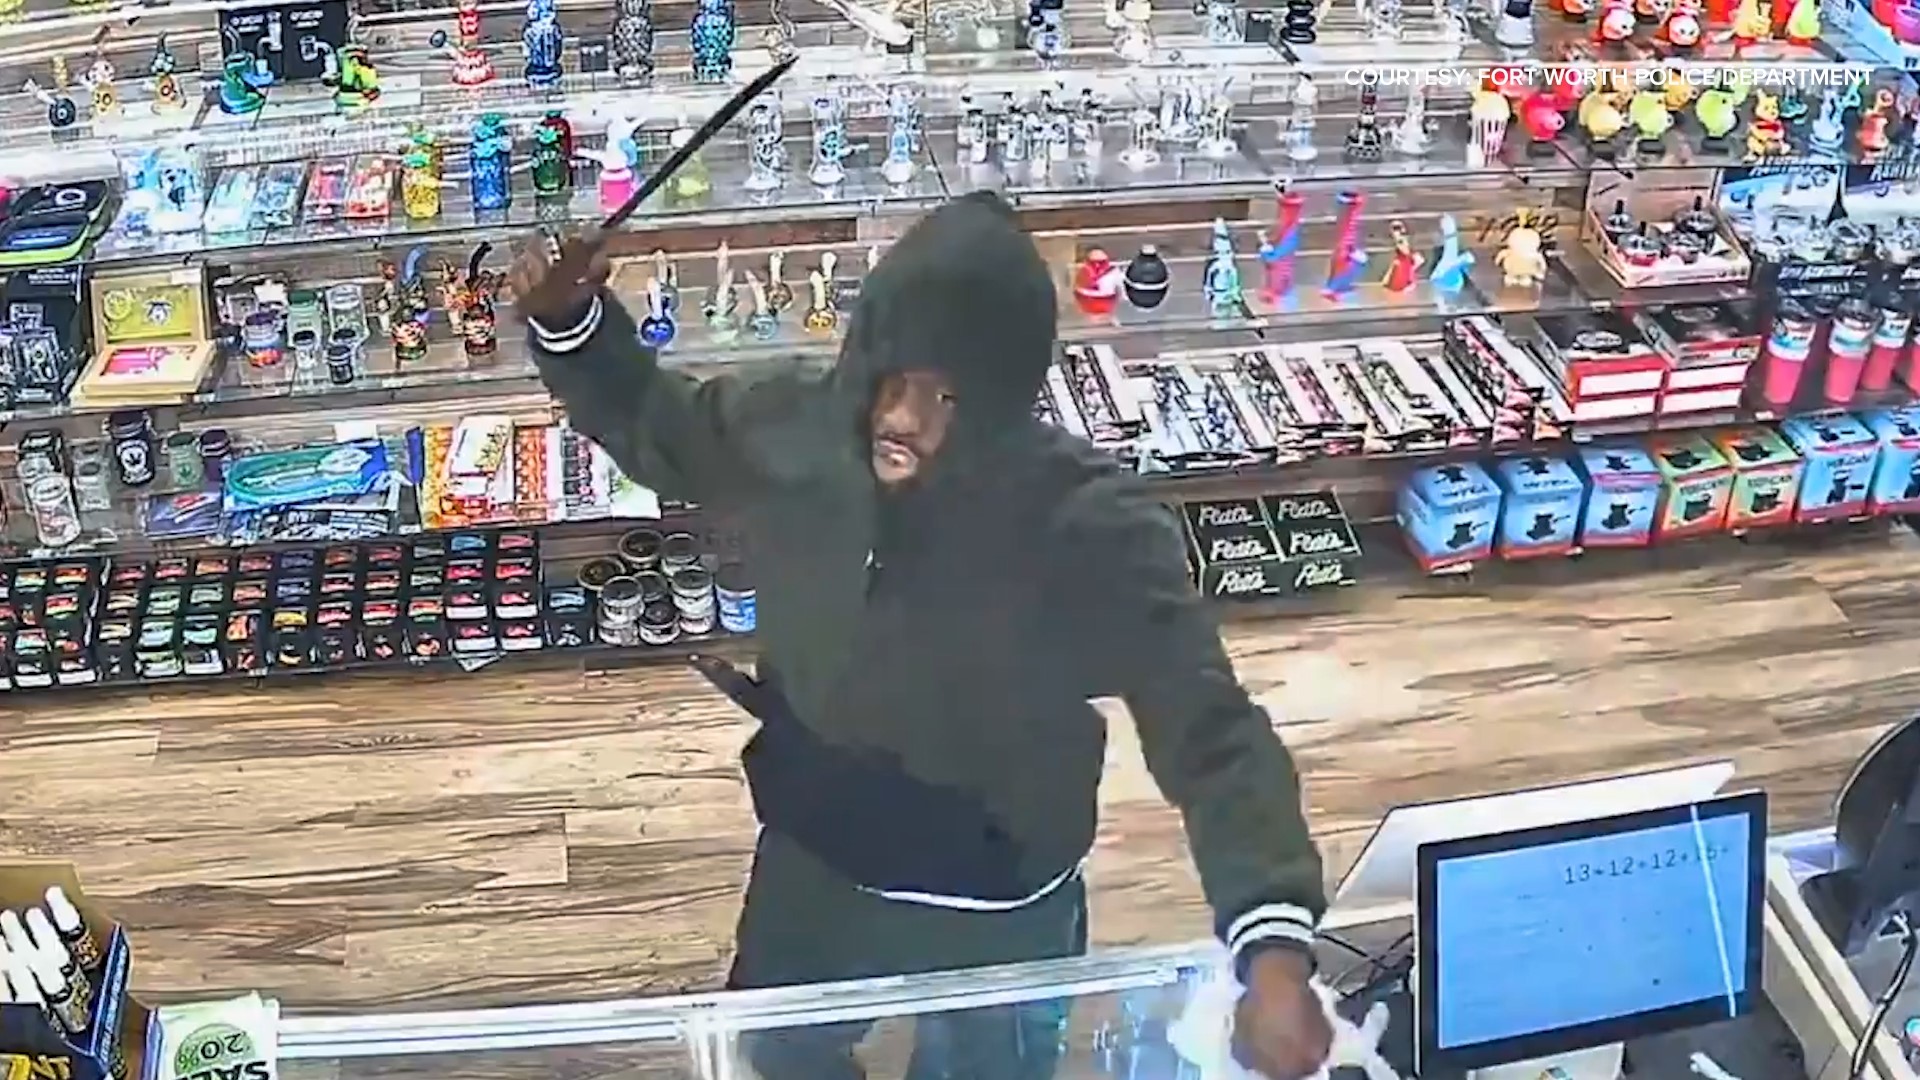 Surveillance video shows a suspect in a black hoodie and black sweatpants going into a store and using a machete during the robbery.